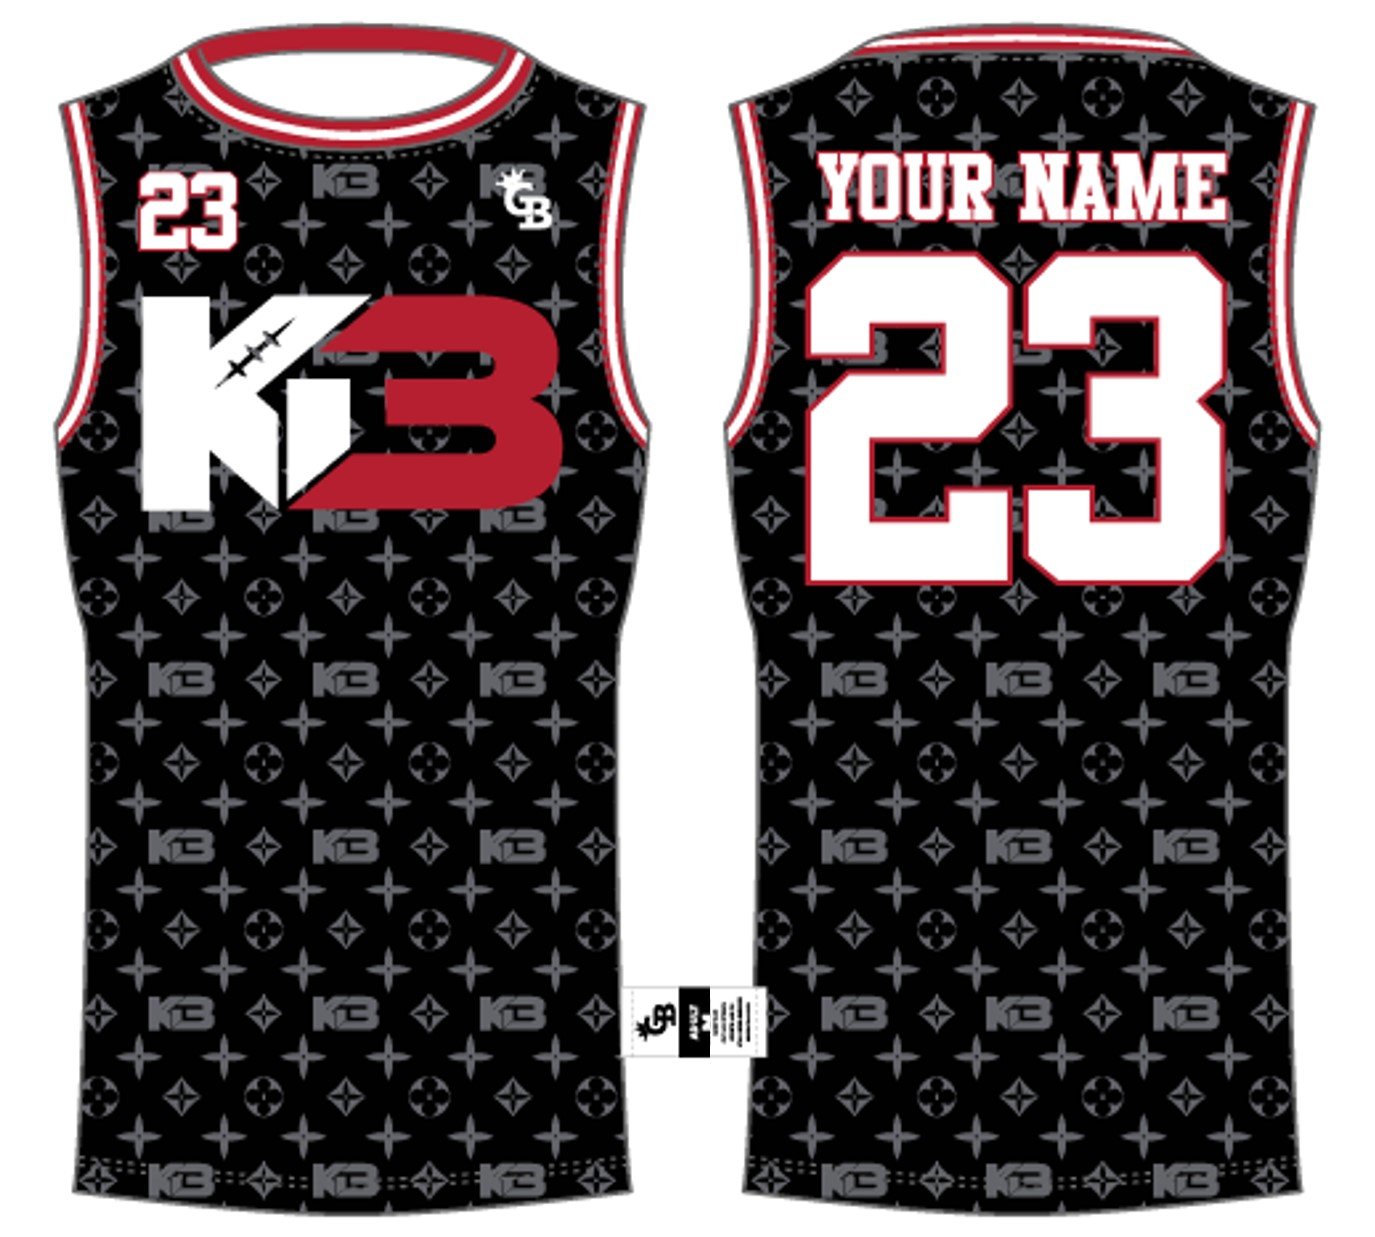 REQUIRED // KB3 TEAM REVERSABLE JERSEY — KB3 FOOTBALL TRAINING